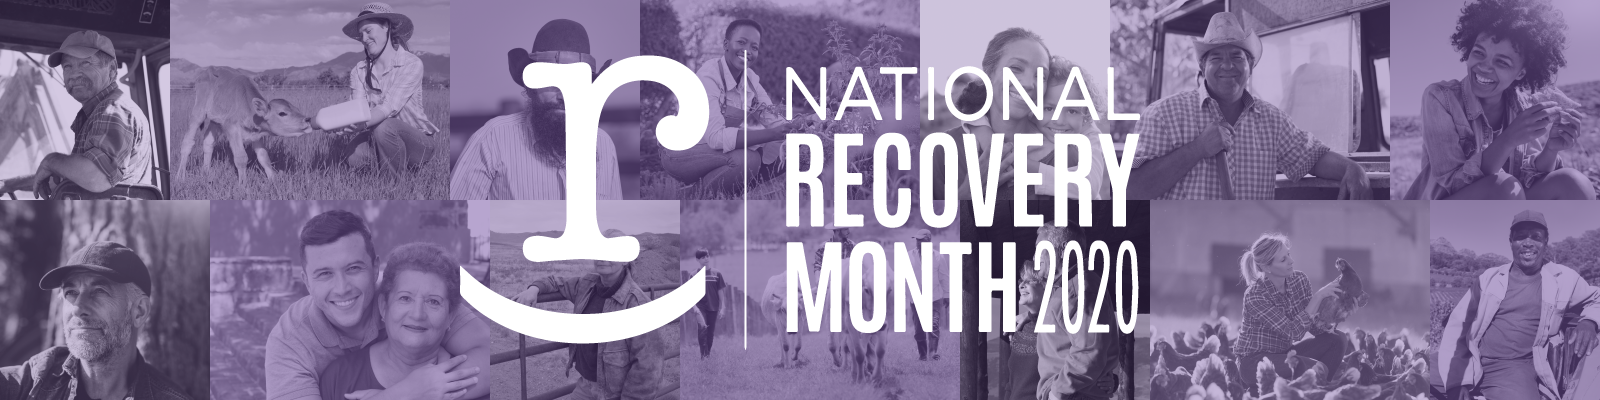 Recovery Month 2020 Logo